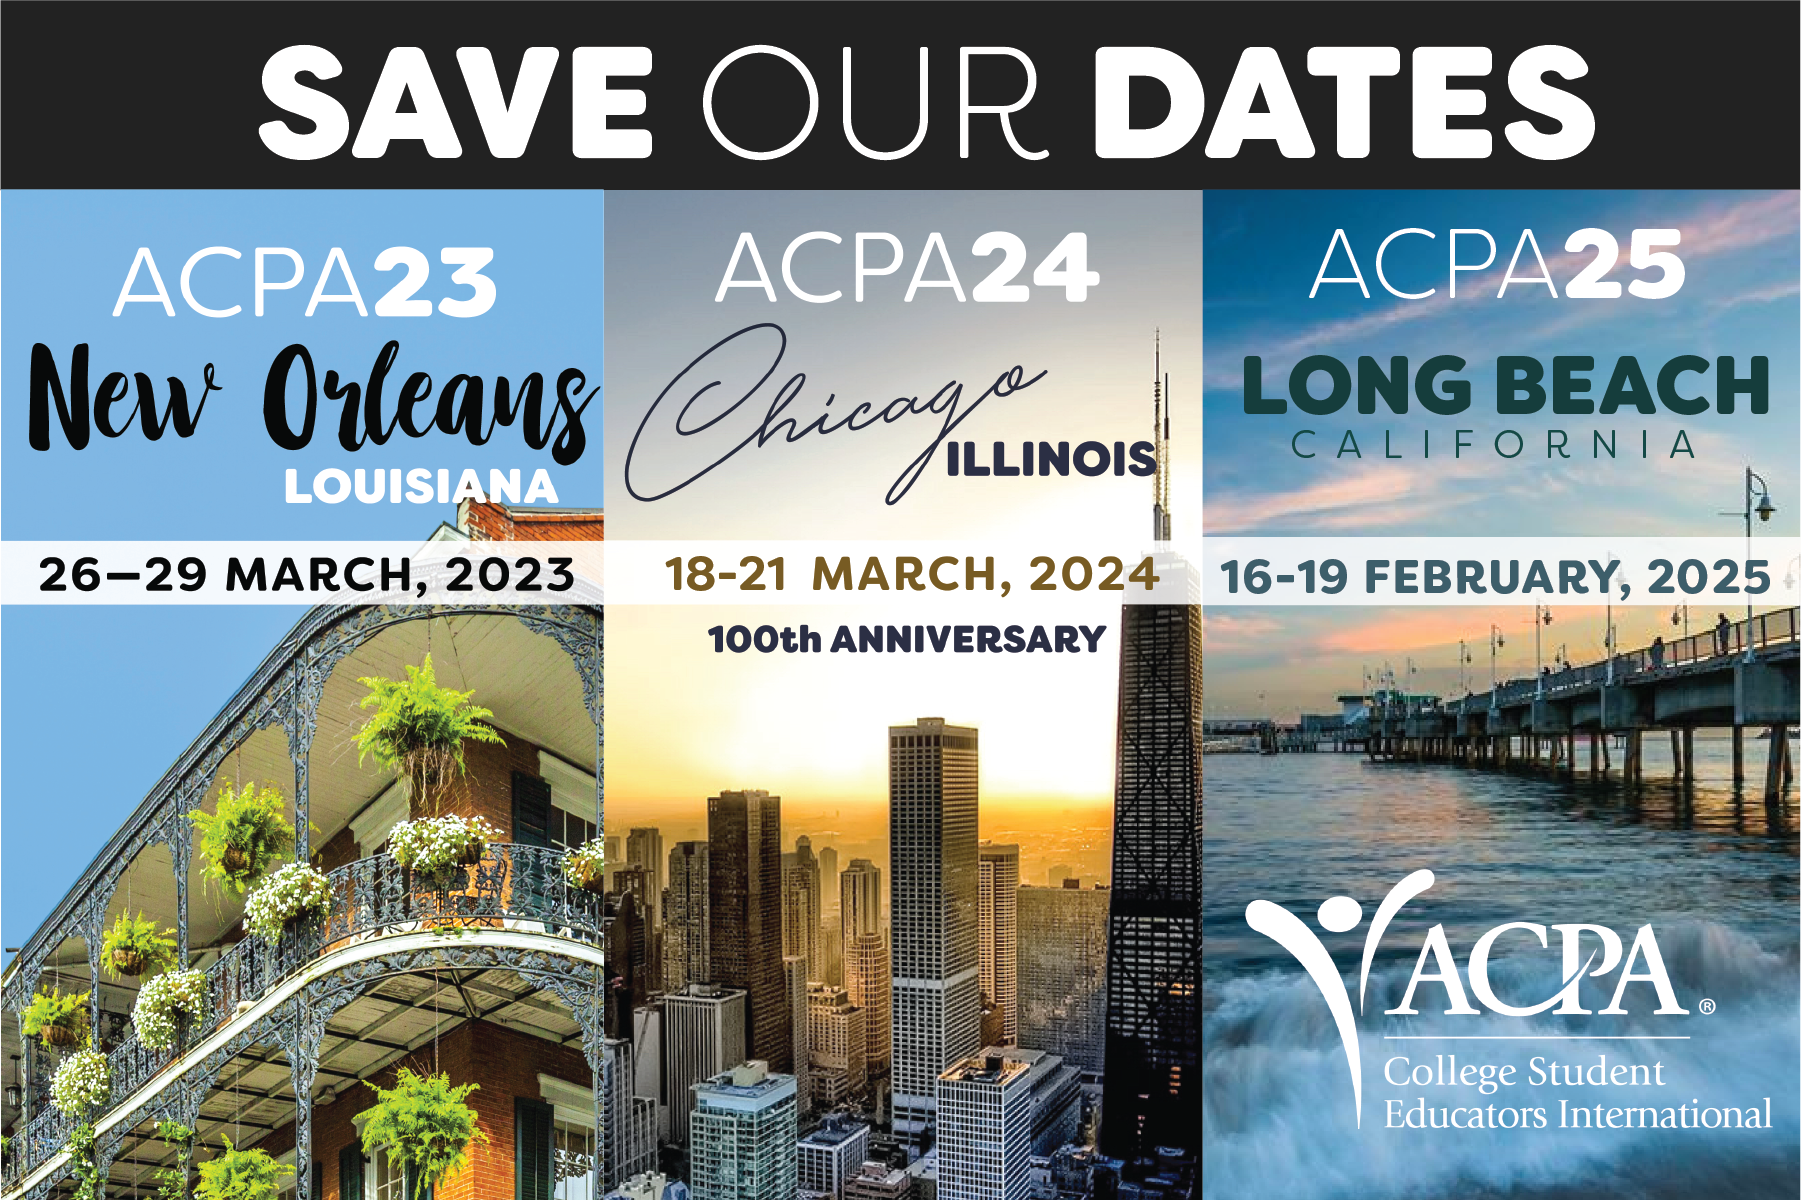 Save Our Dates. ACPA23 New Orleans, ACPA24 Chicago 18-21 March 2021 100th Anniversary, ACPA25 Long Beach Balifornia 16-19 February 2025